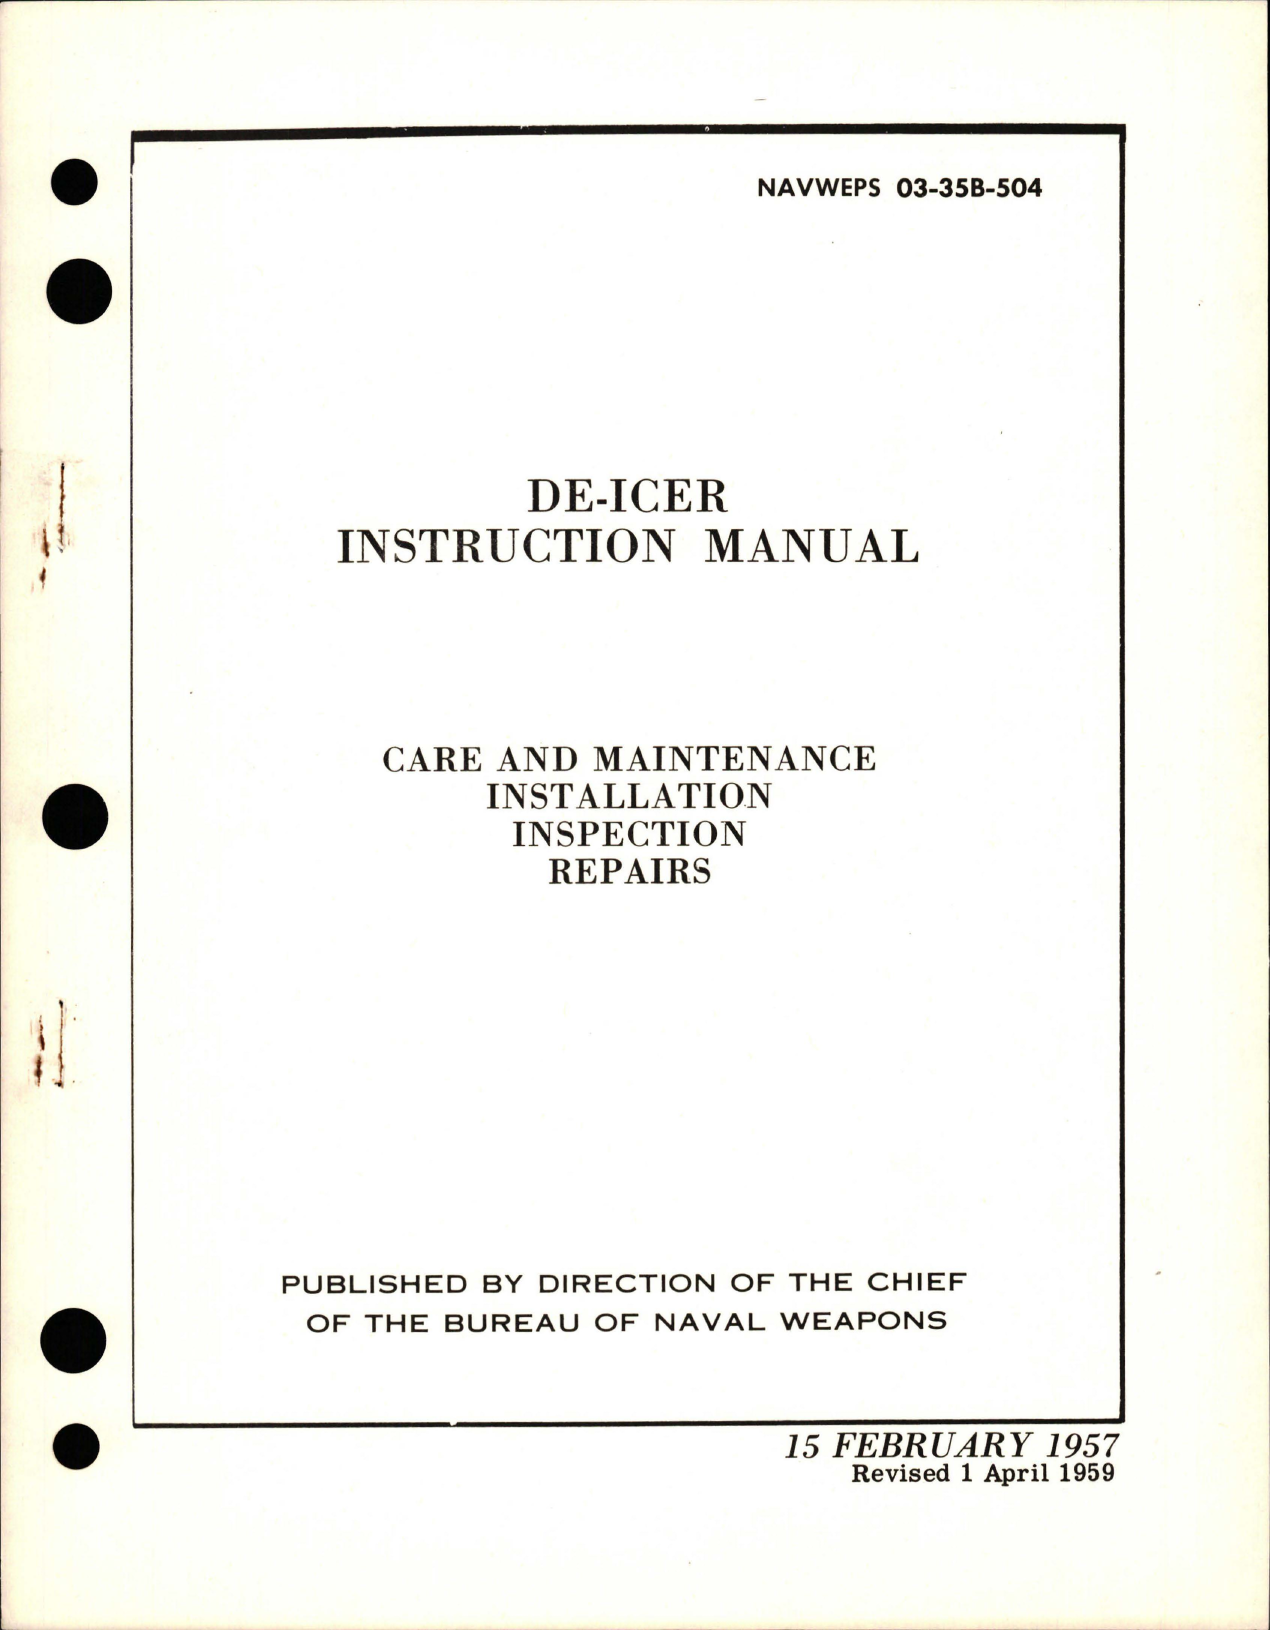 Sample page 1 from AirCorps Library document: Instruction Manual for De-Icer Care & Maintenance, Installation, Inspection, and Repairs